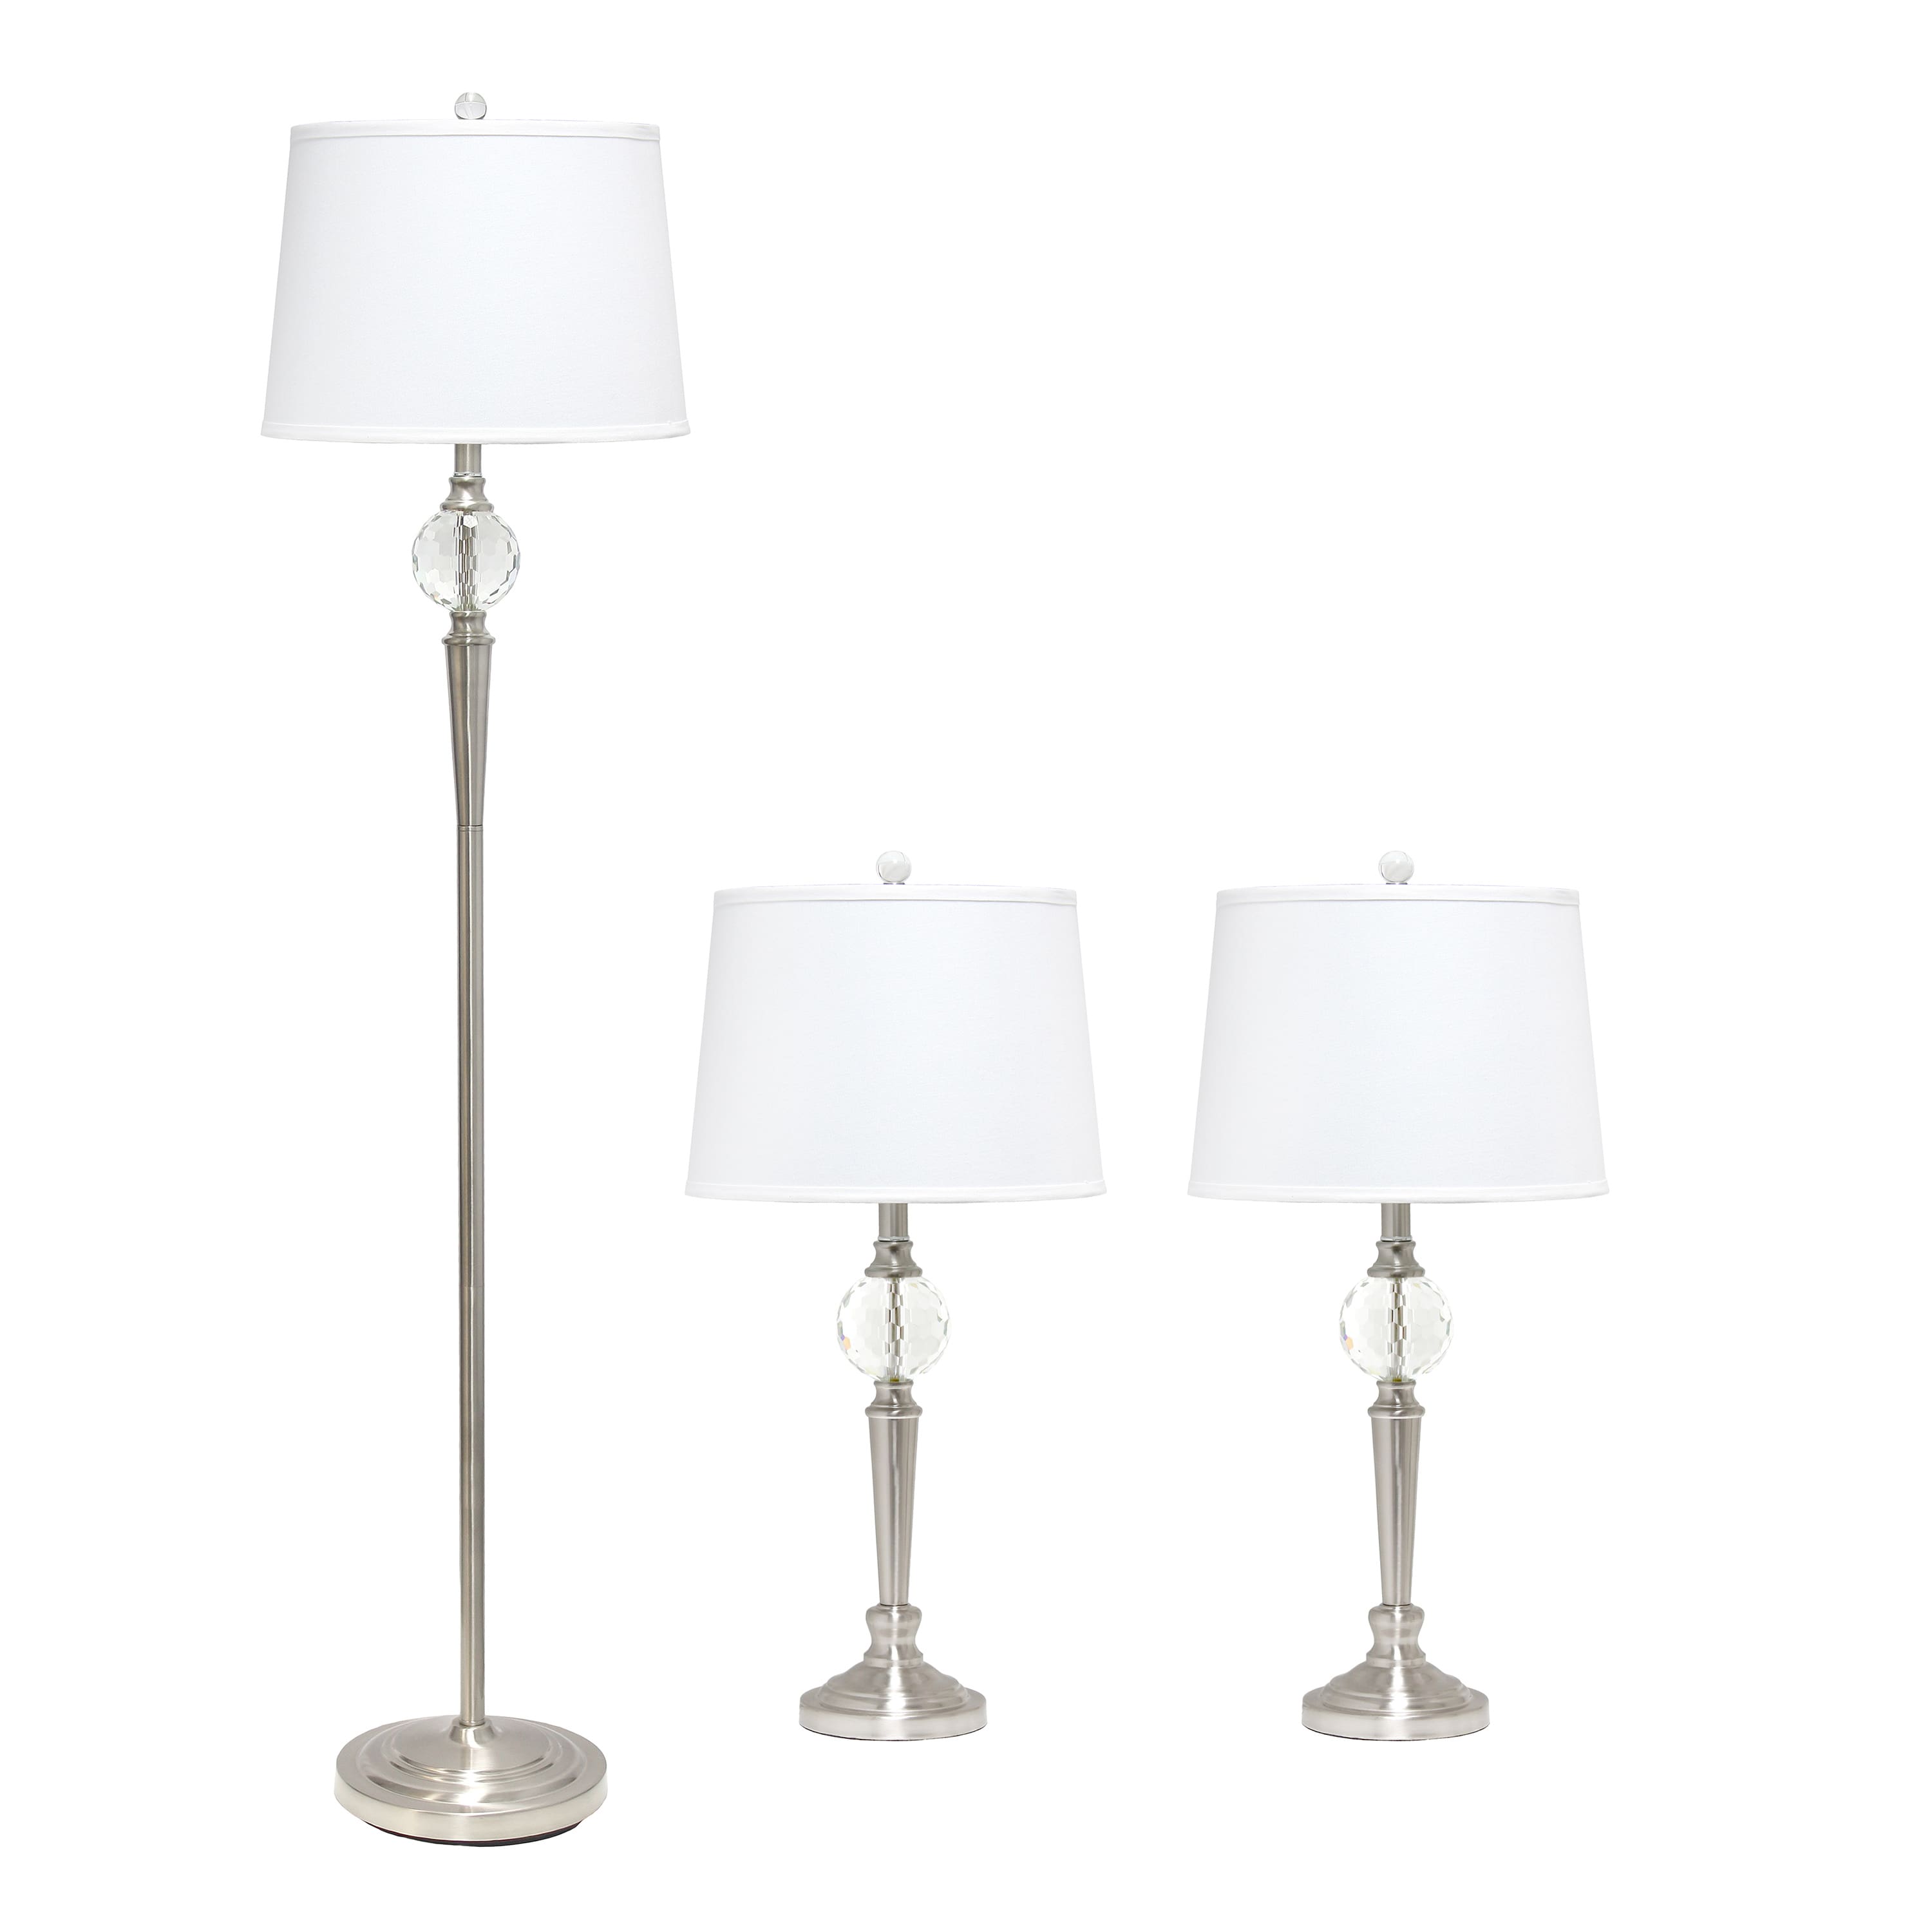 Lalia Home Brushed Nickel Crystal Drop Table and Floor Lamp Set